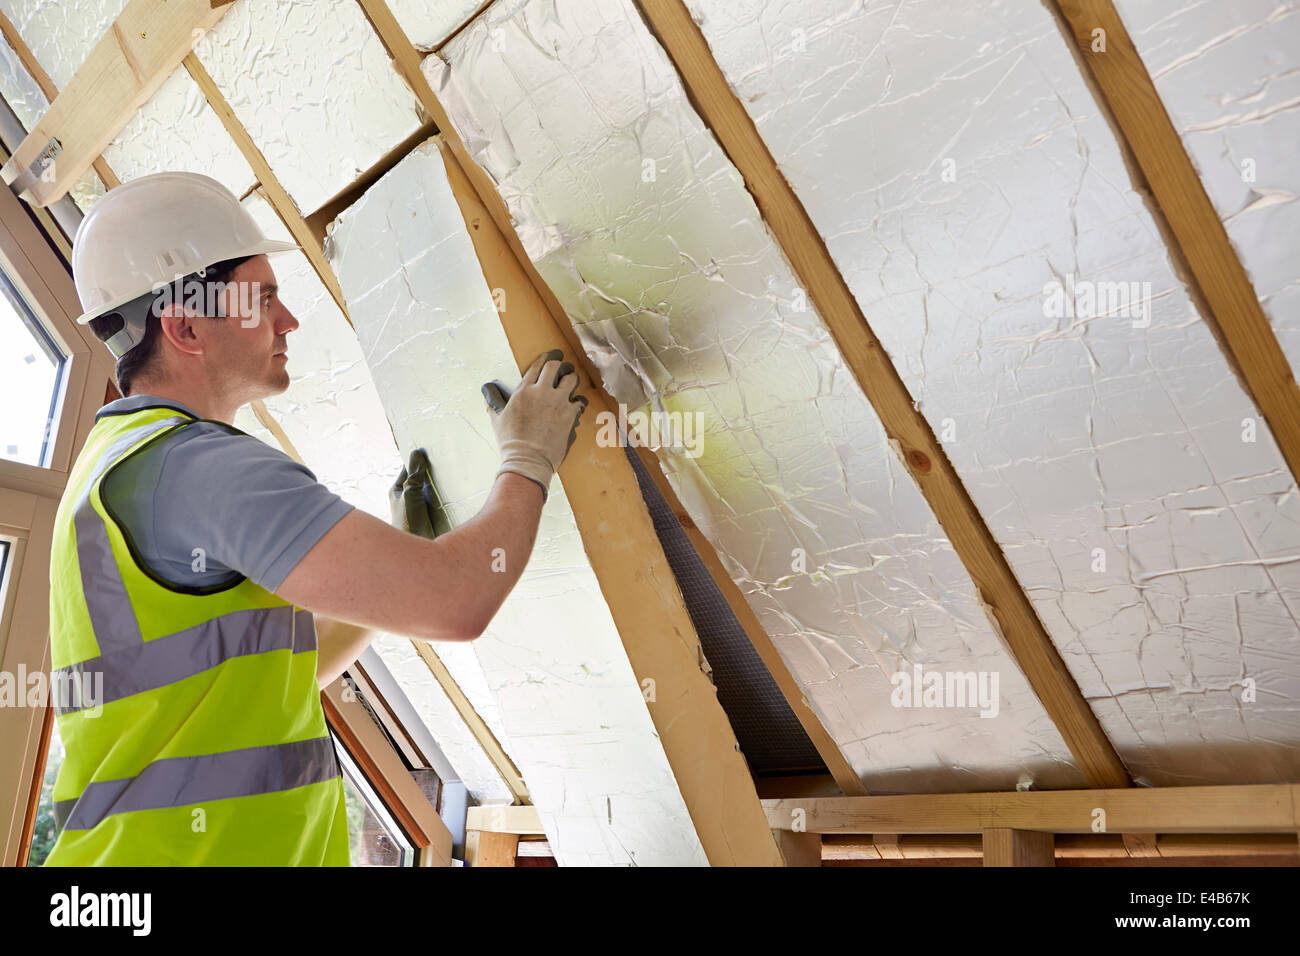 Builder Fitting Insulation Into Roof Of New Home Stock Photo